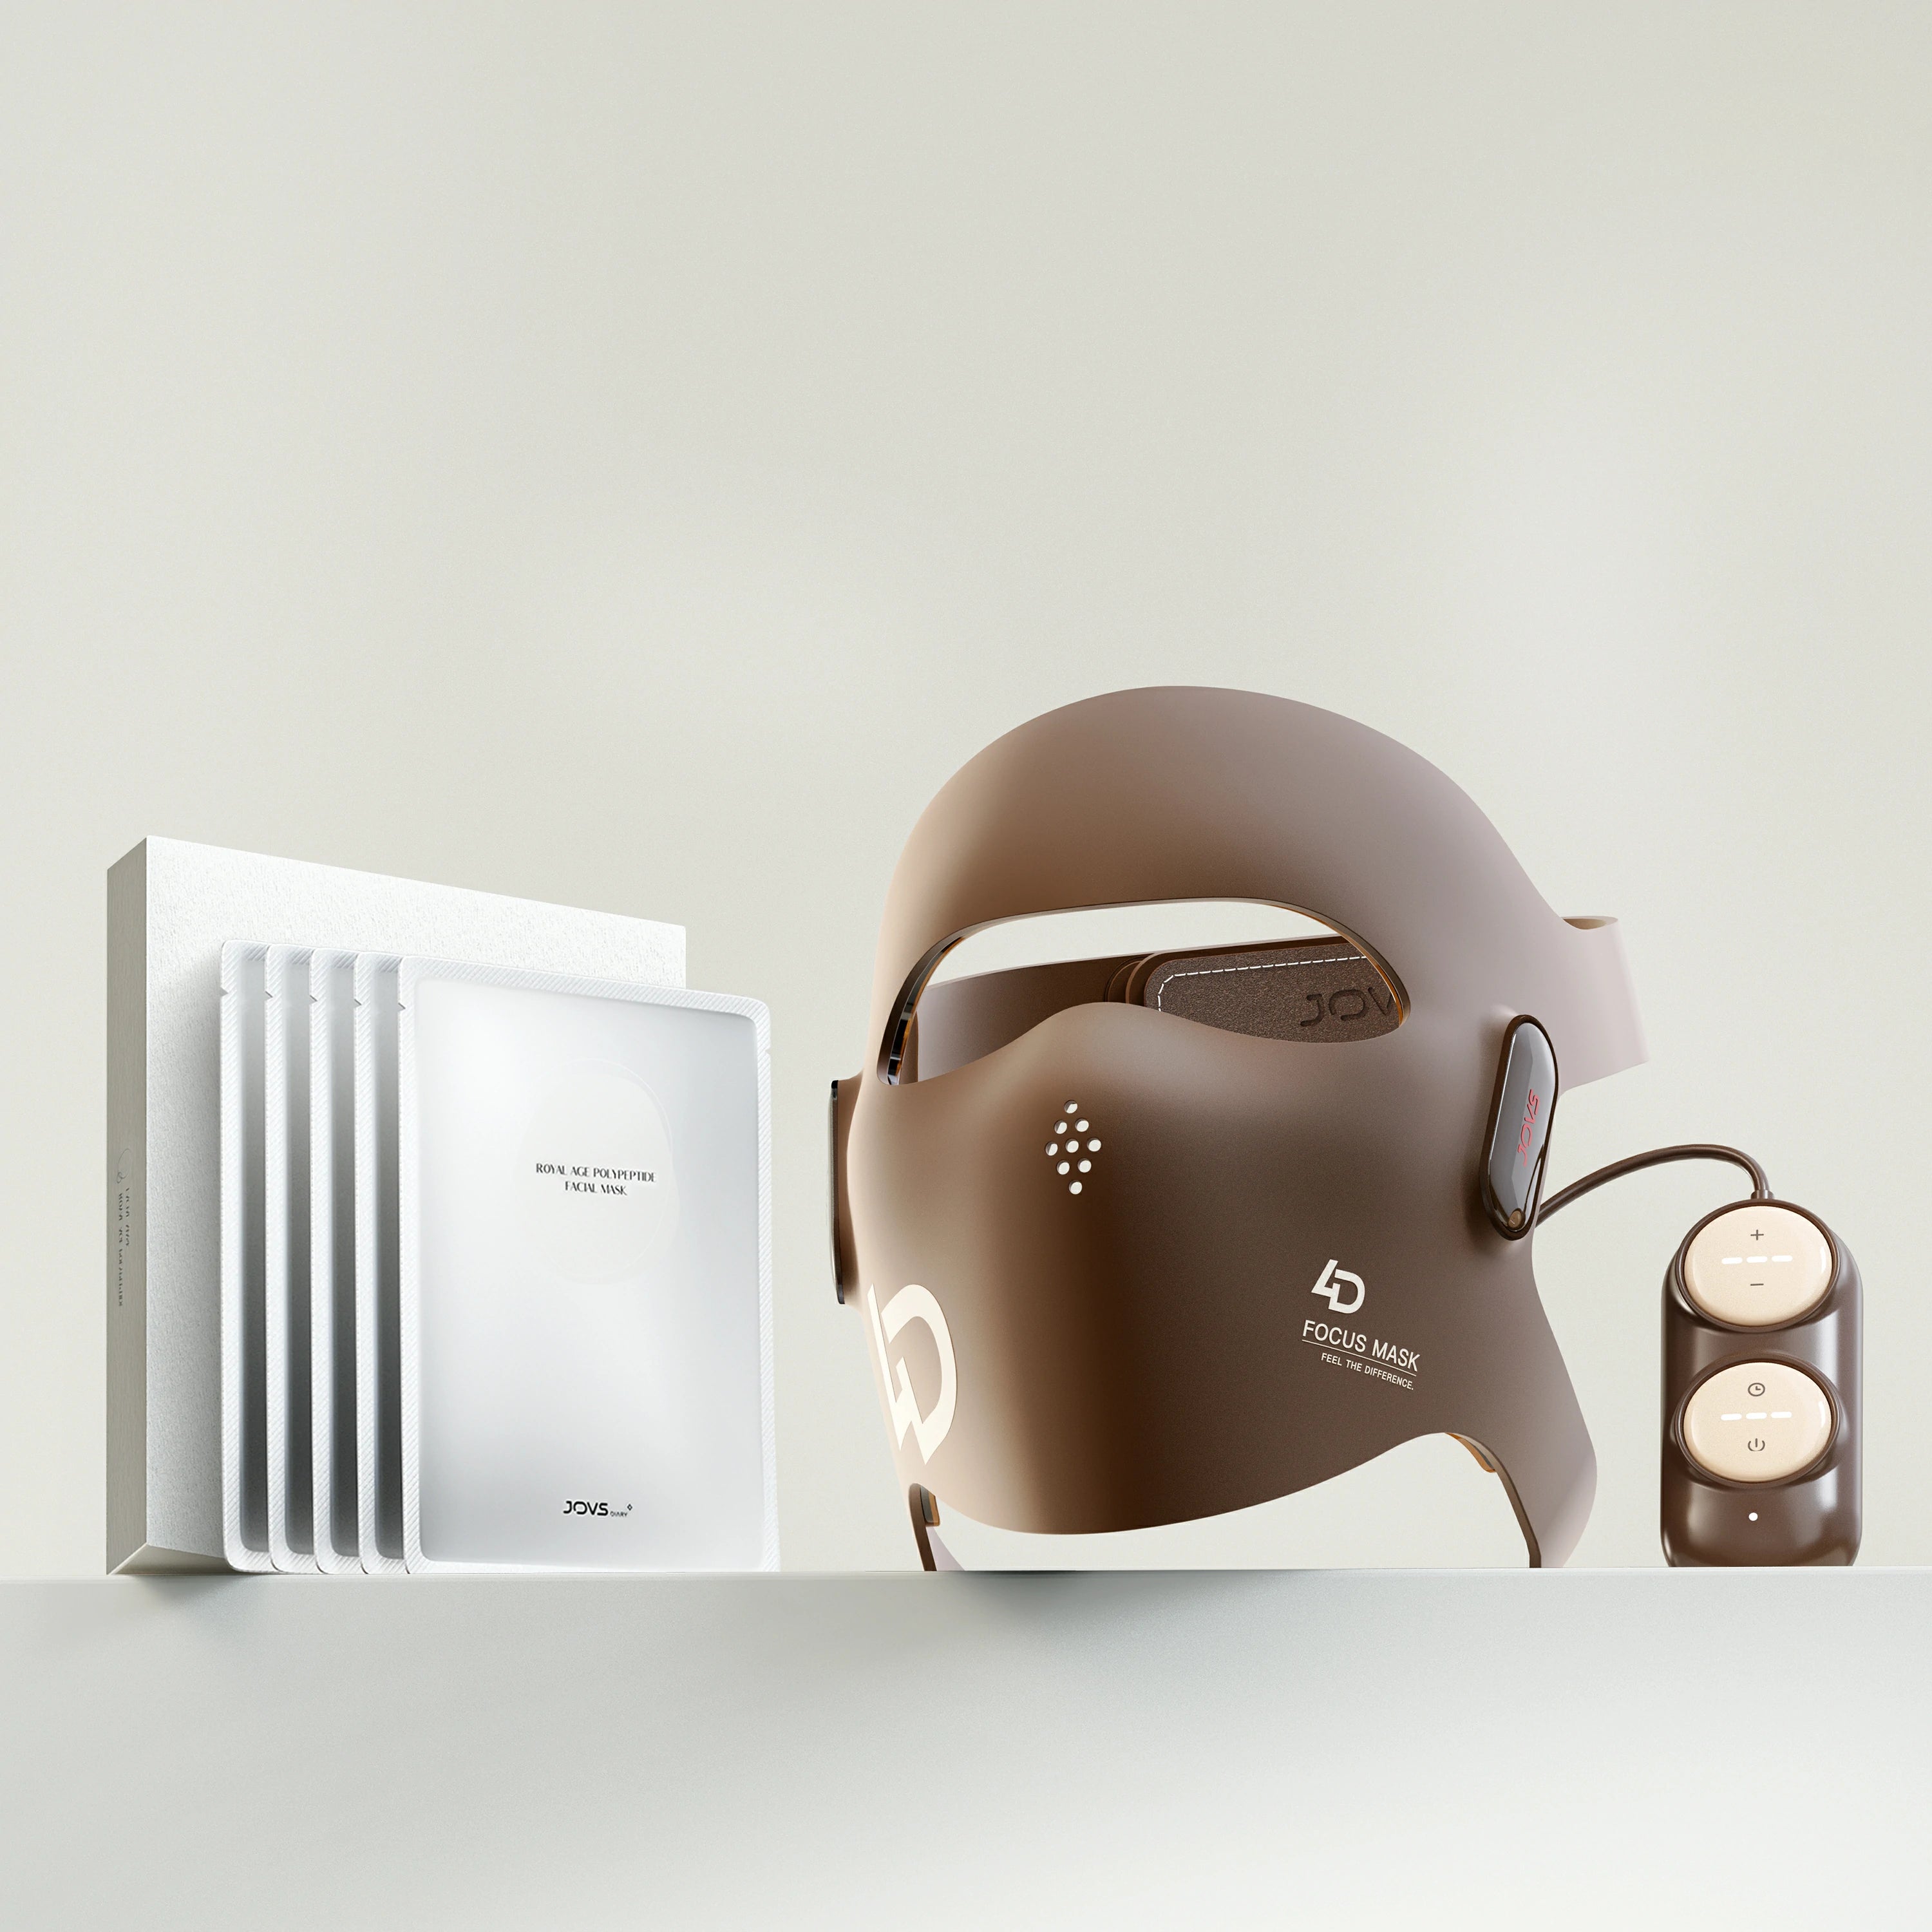 JOVS 4D Laser Mask Kit presented with its elegant packaging, featuring the mask with Laser light and a smart controller, for a premier, advanced skincare experience.